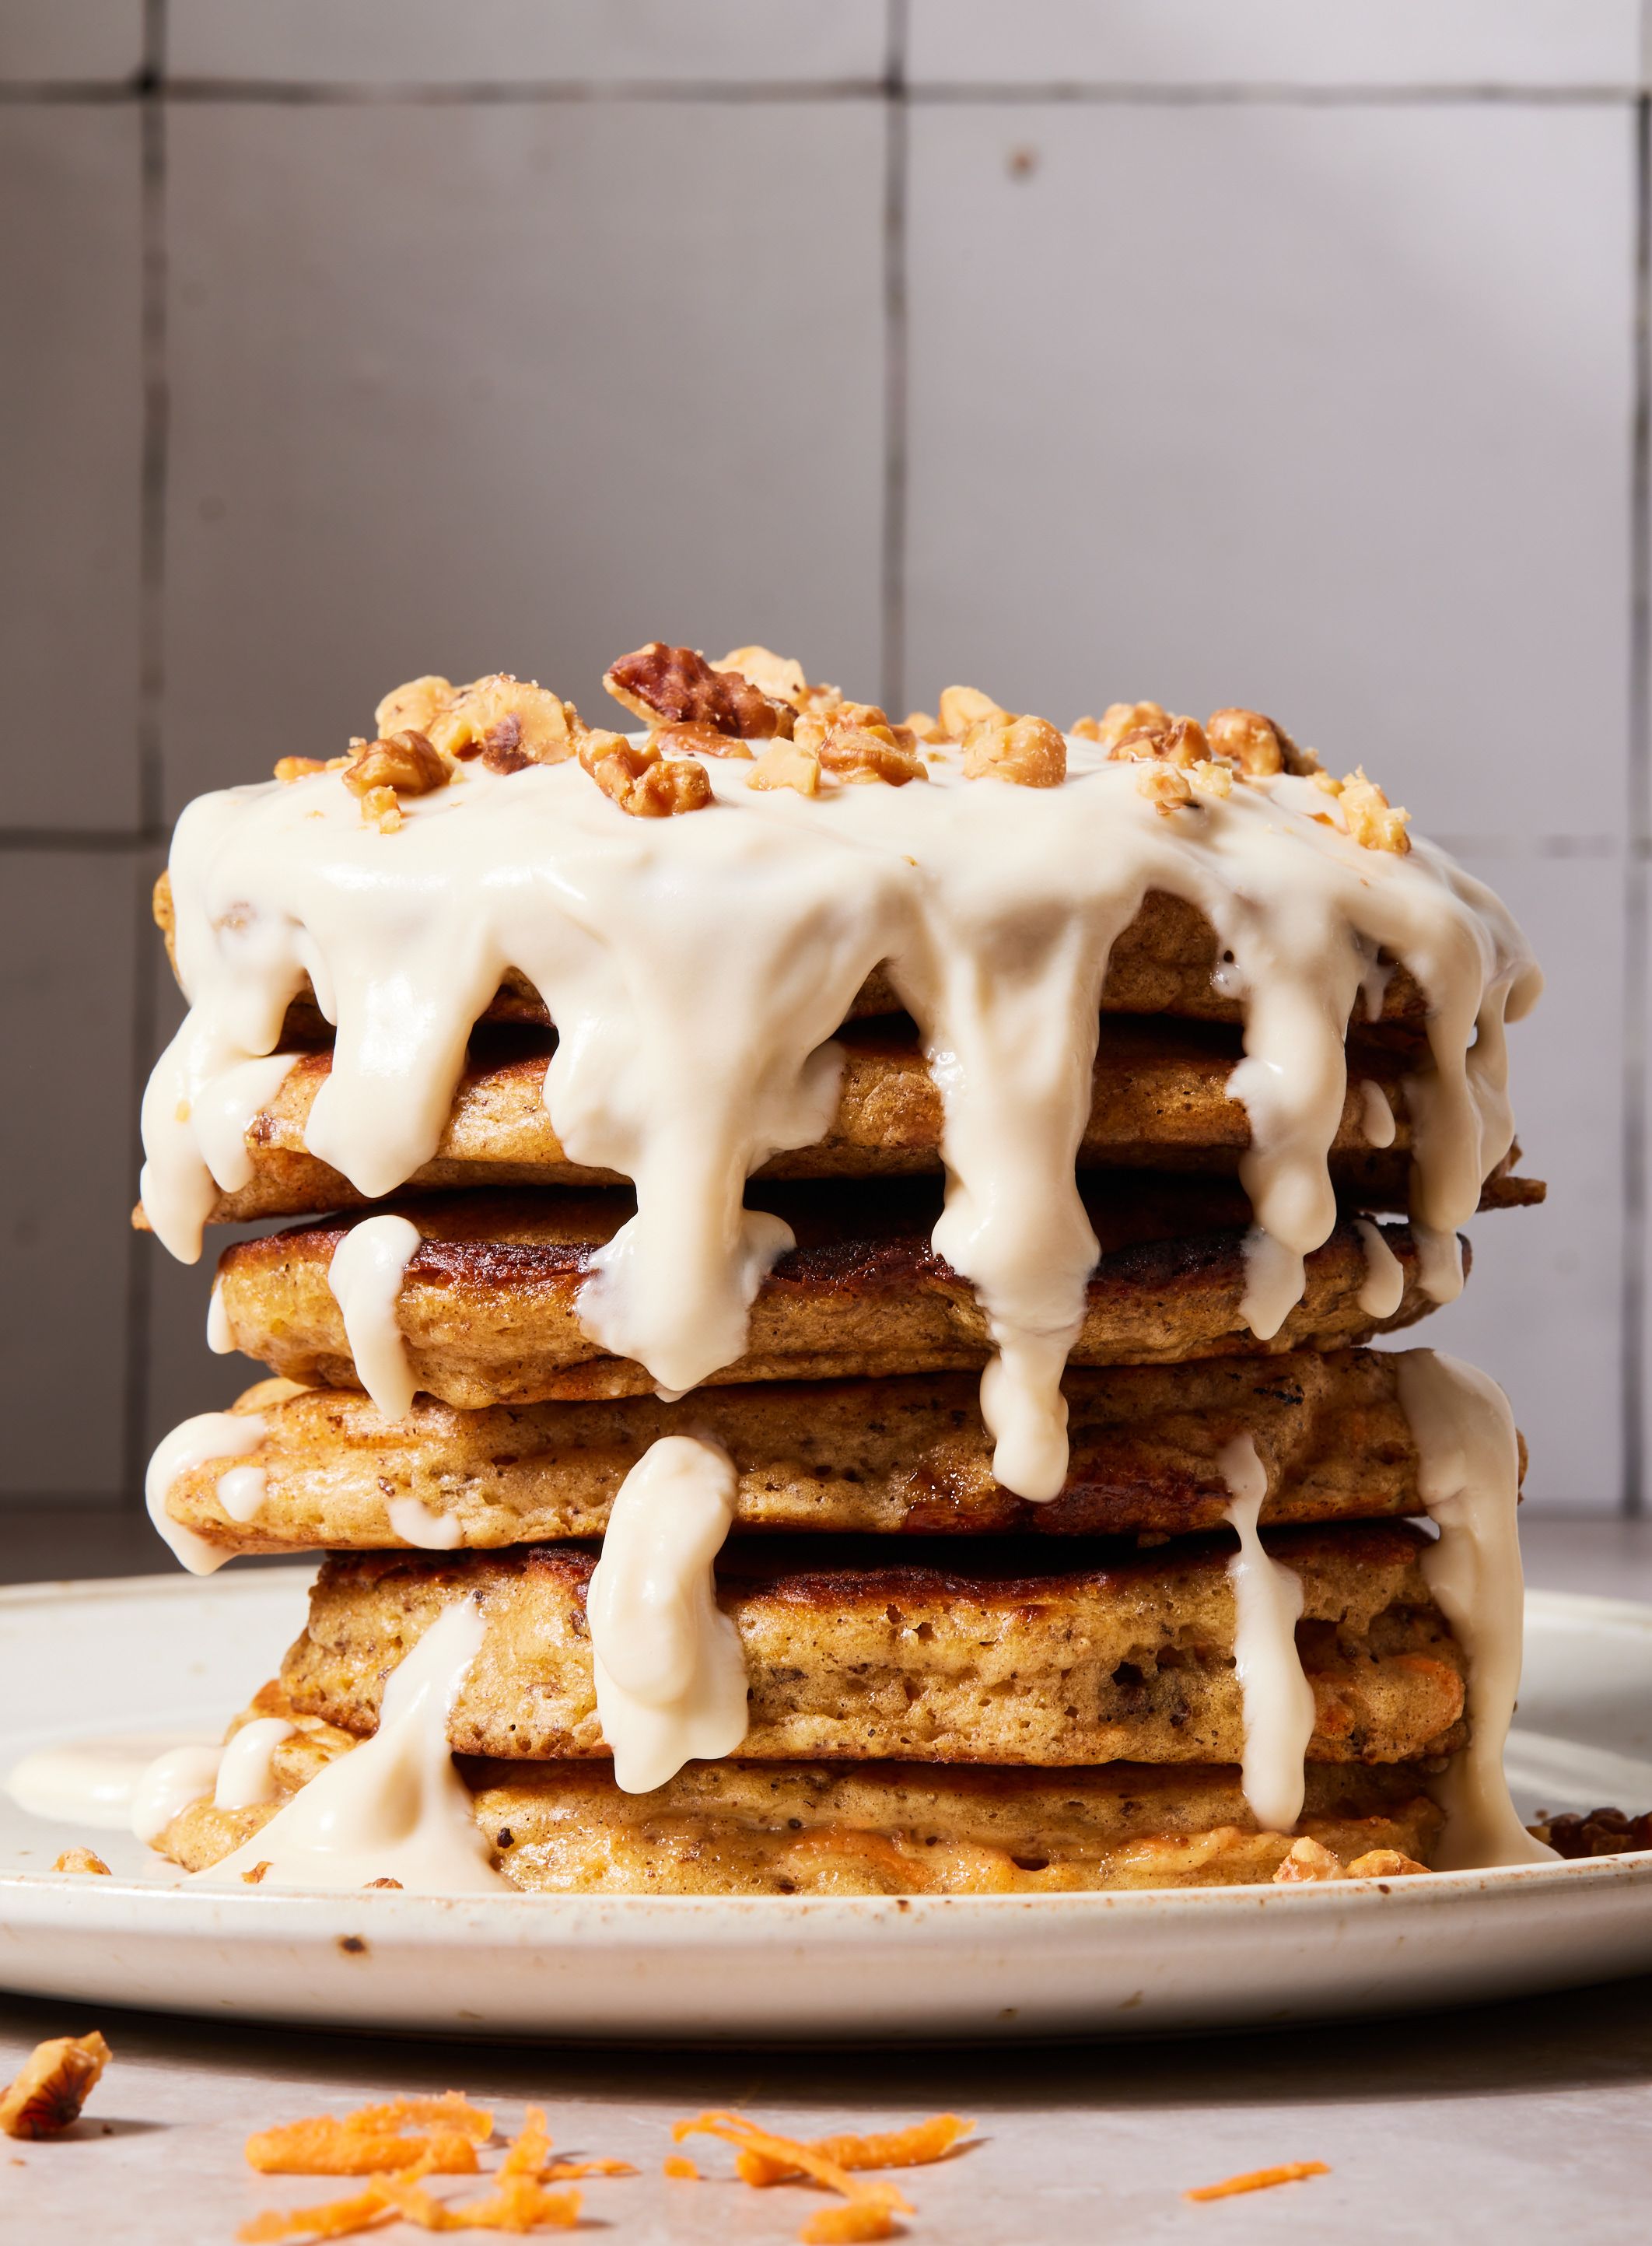 How to Make Healthy Carrot Cake Pancakes - A Delicious & Easy Recipe